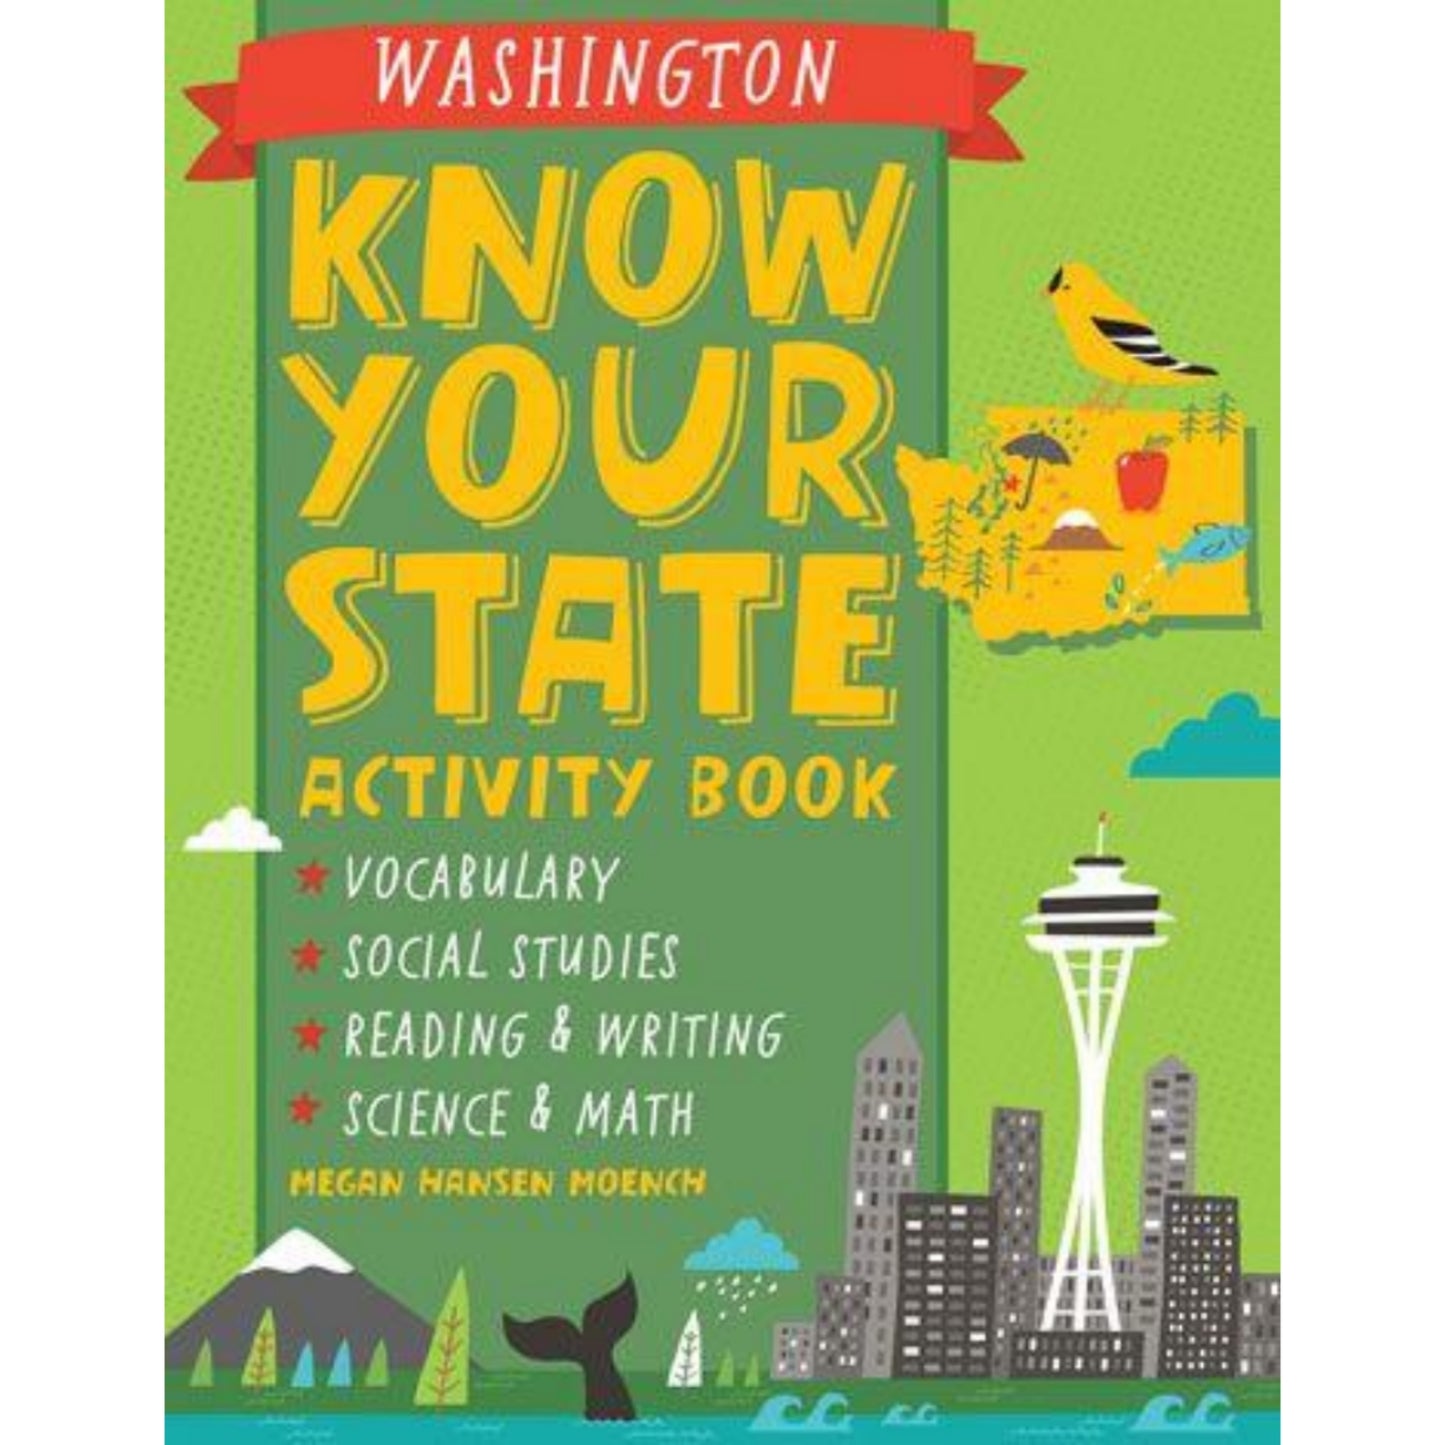 Washington: Know Your State Activity Book